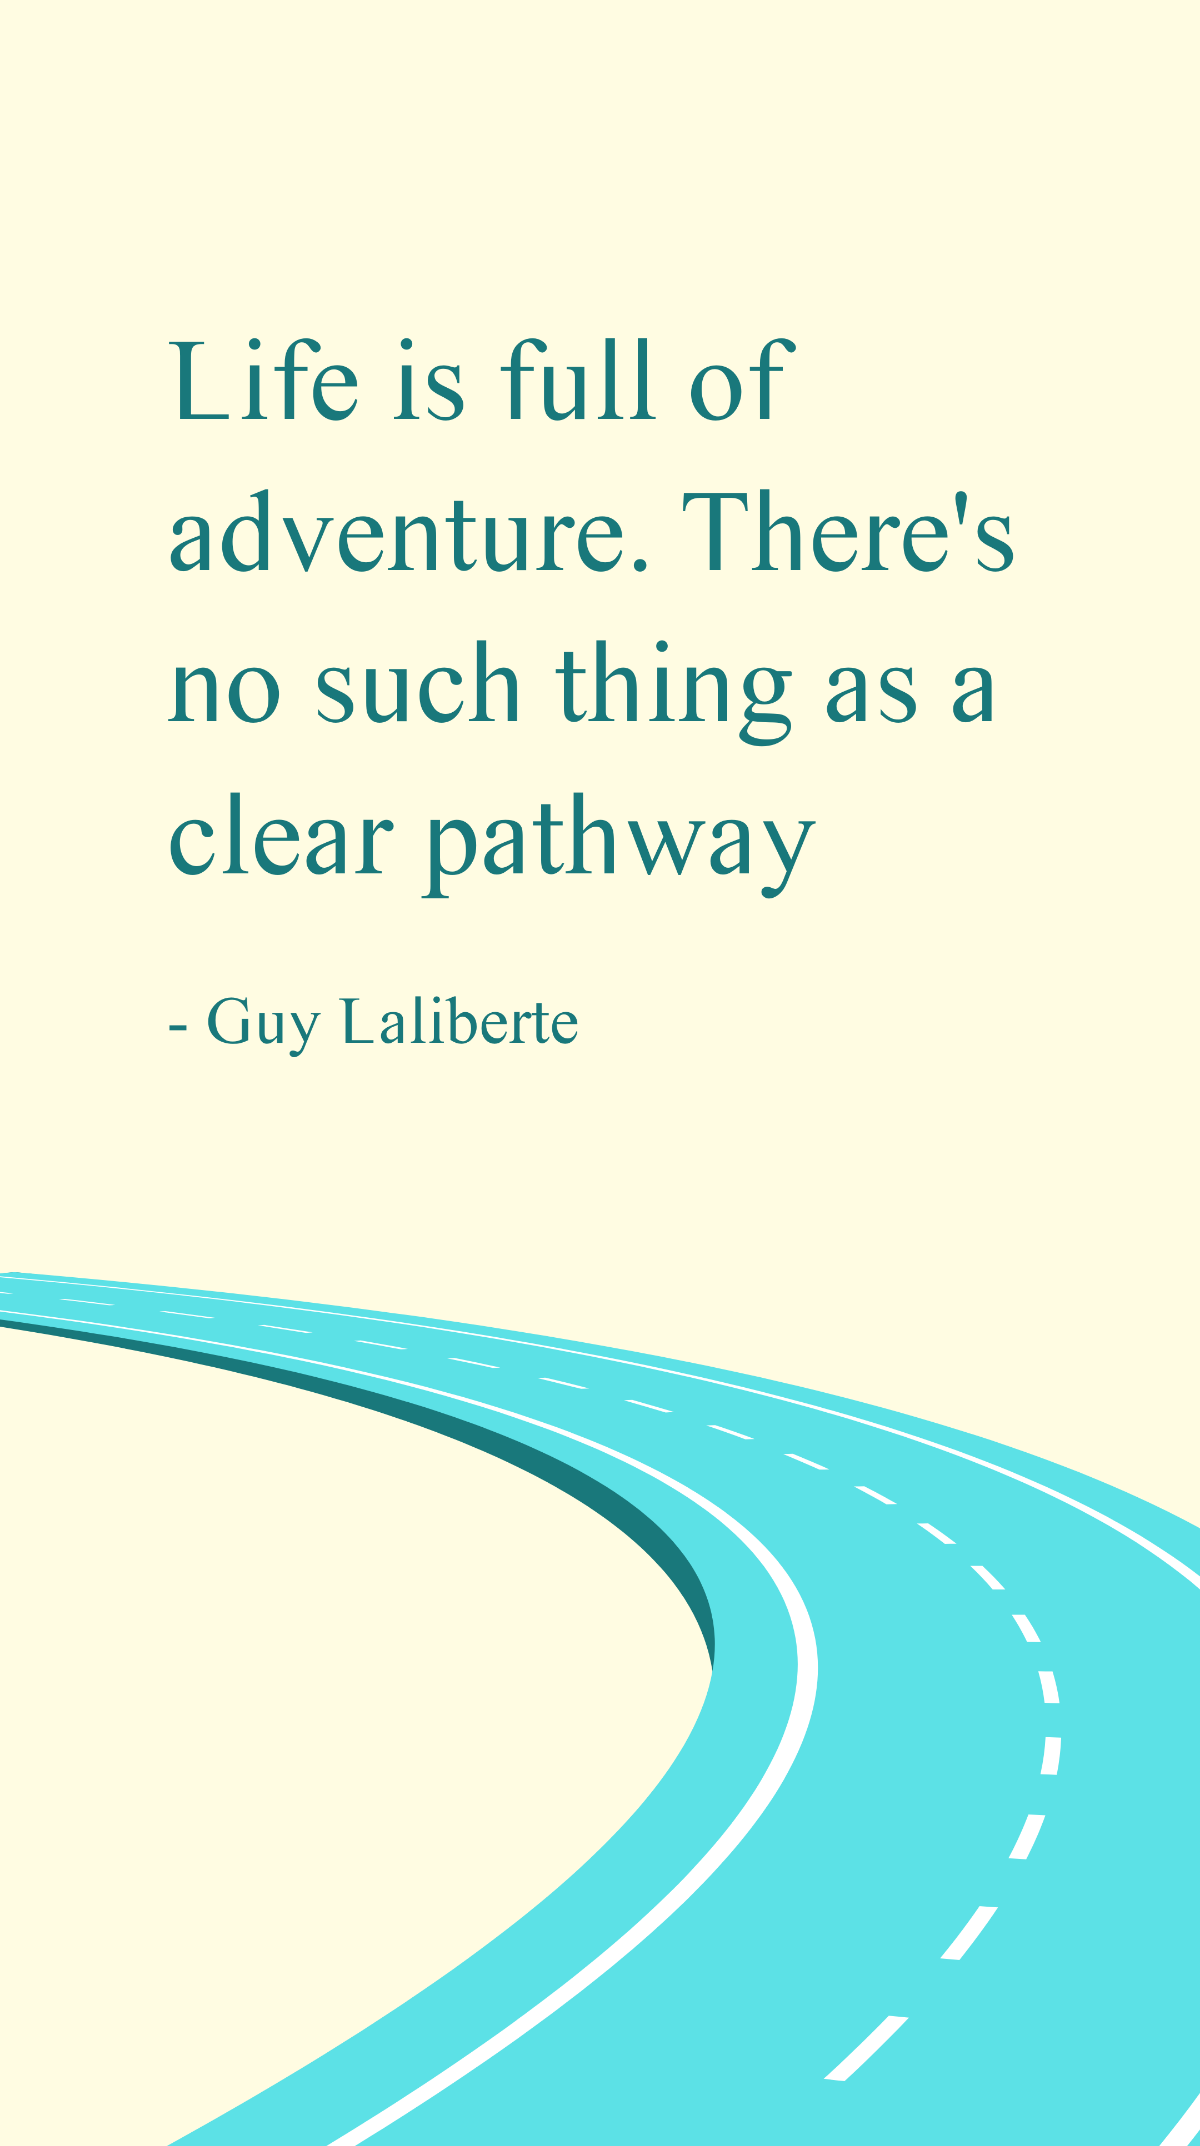 Guy Laliberte - Life is full of adventure. There's no such thing as a clear pathway Template